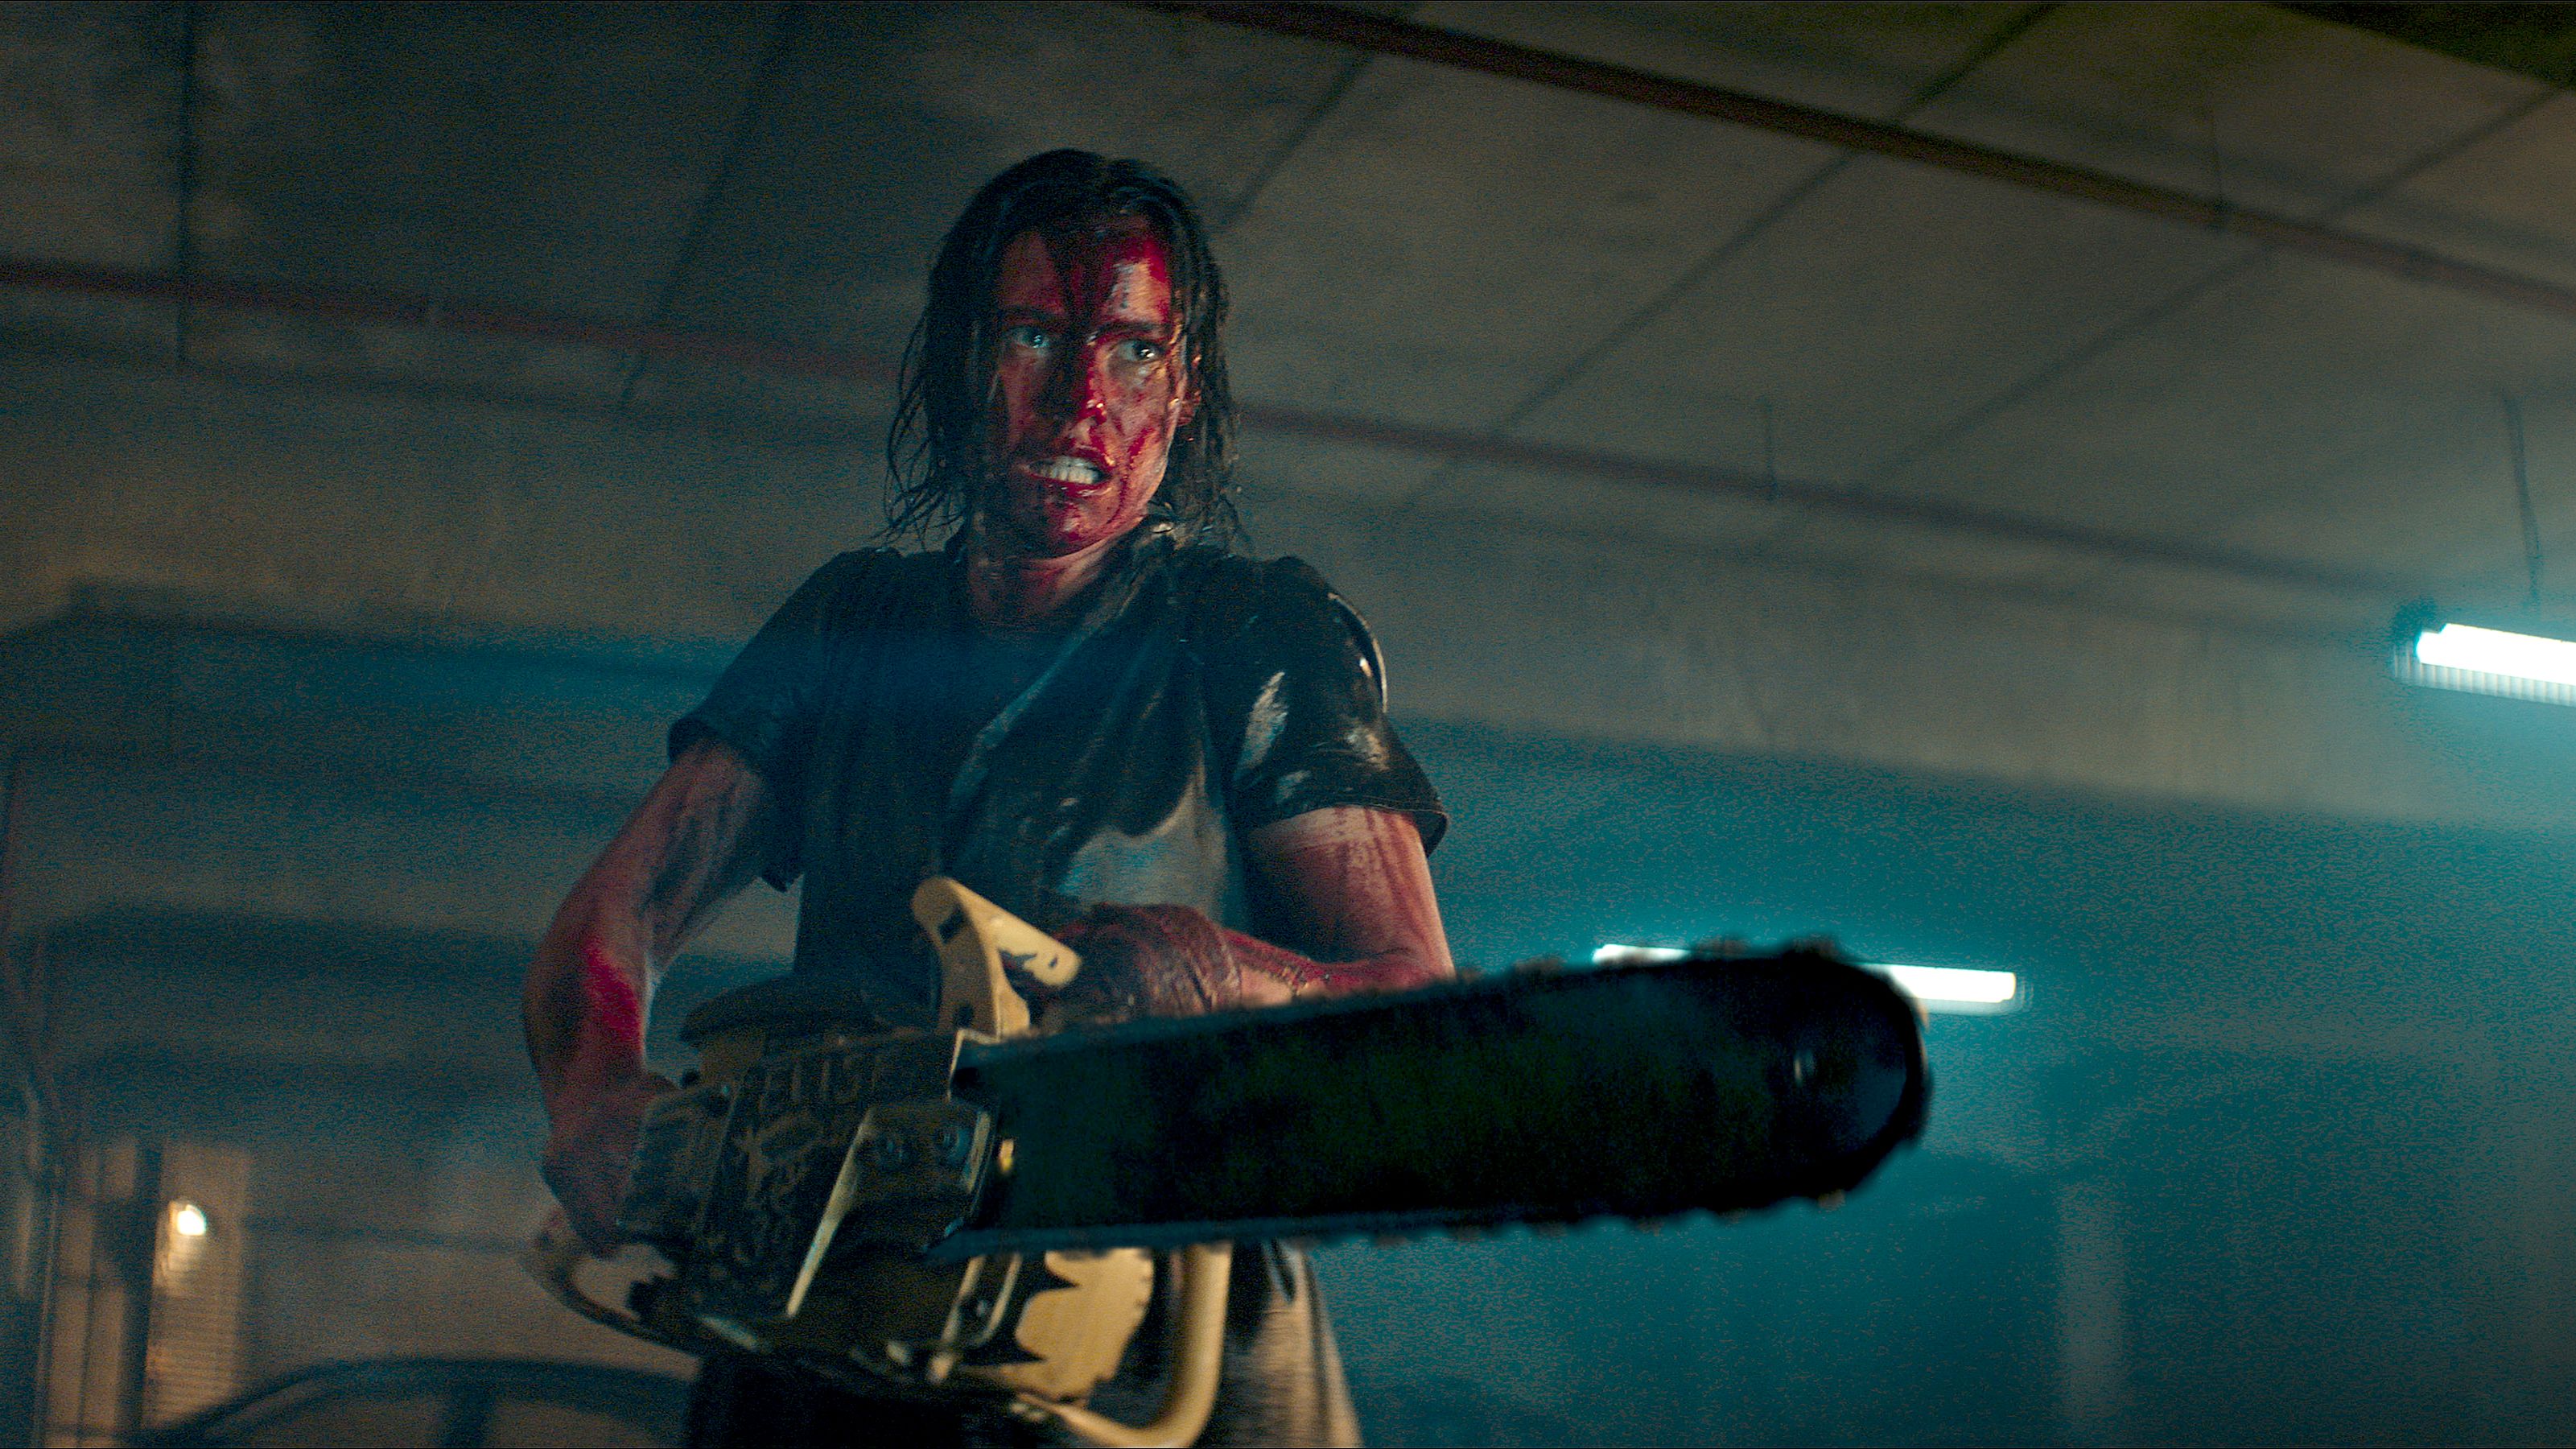 How to Watch 'Evil Dead Rise' - Is 'Evil Dead Rise' Streaming?